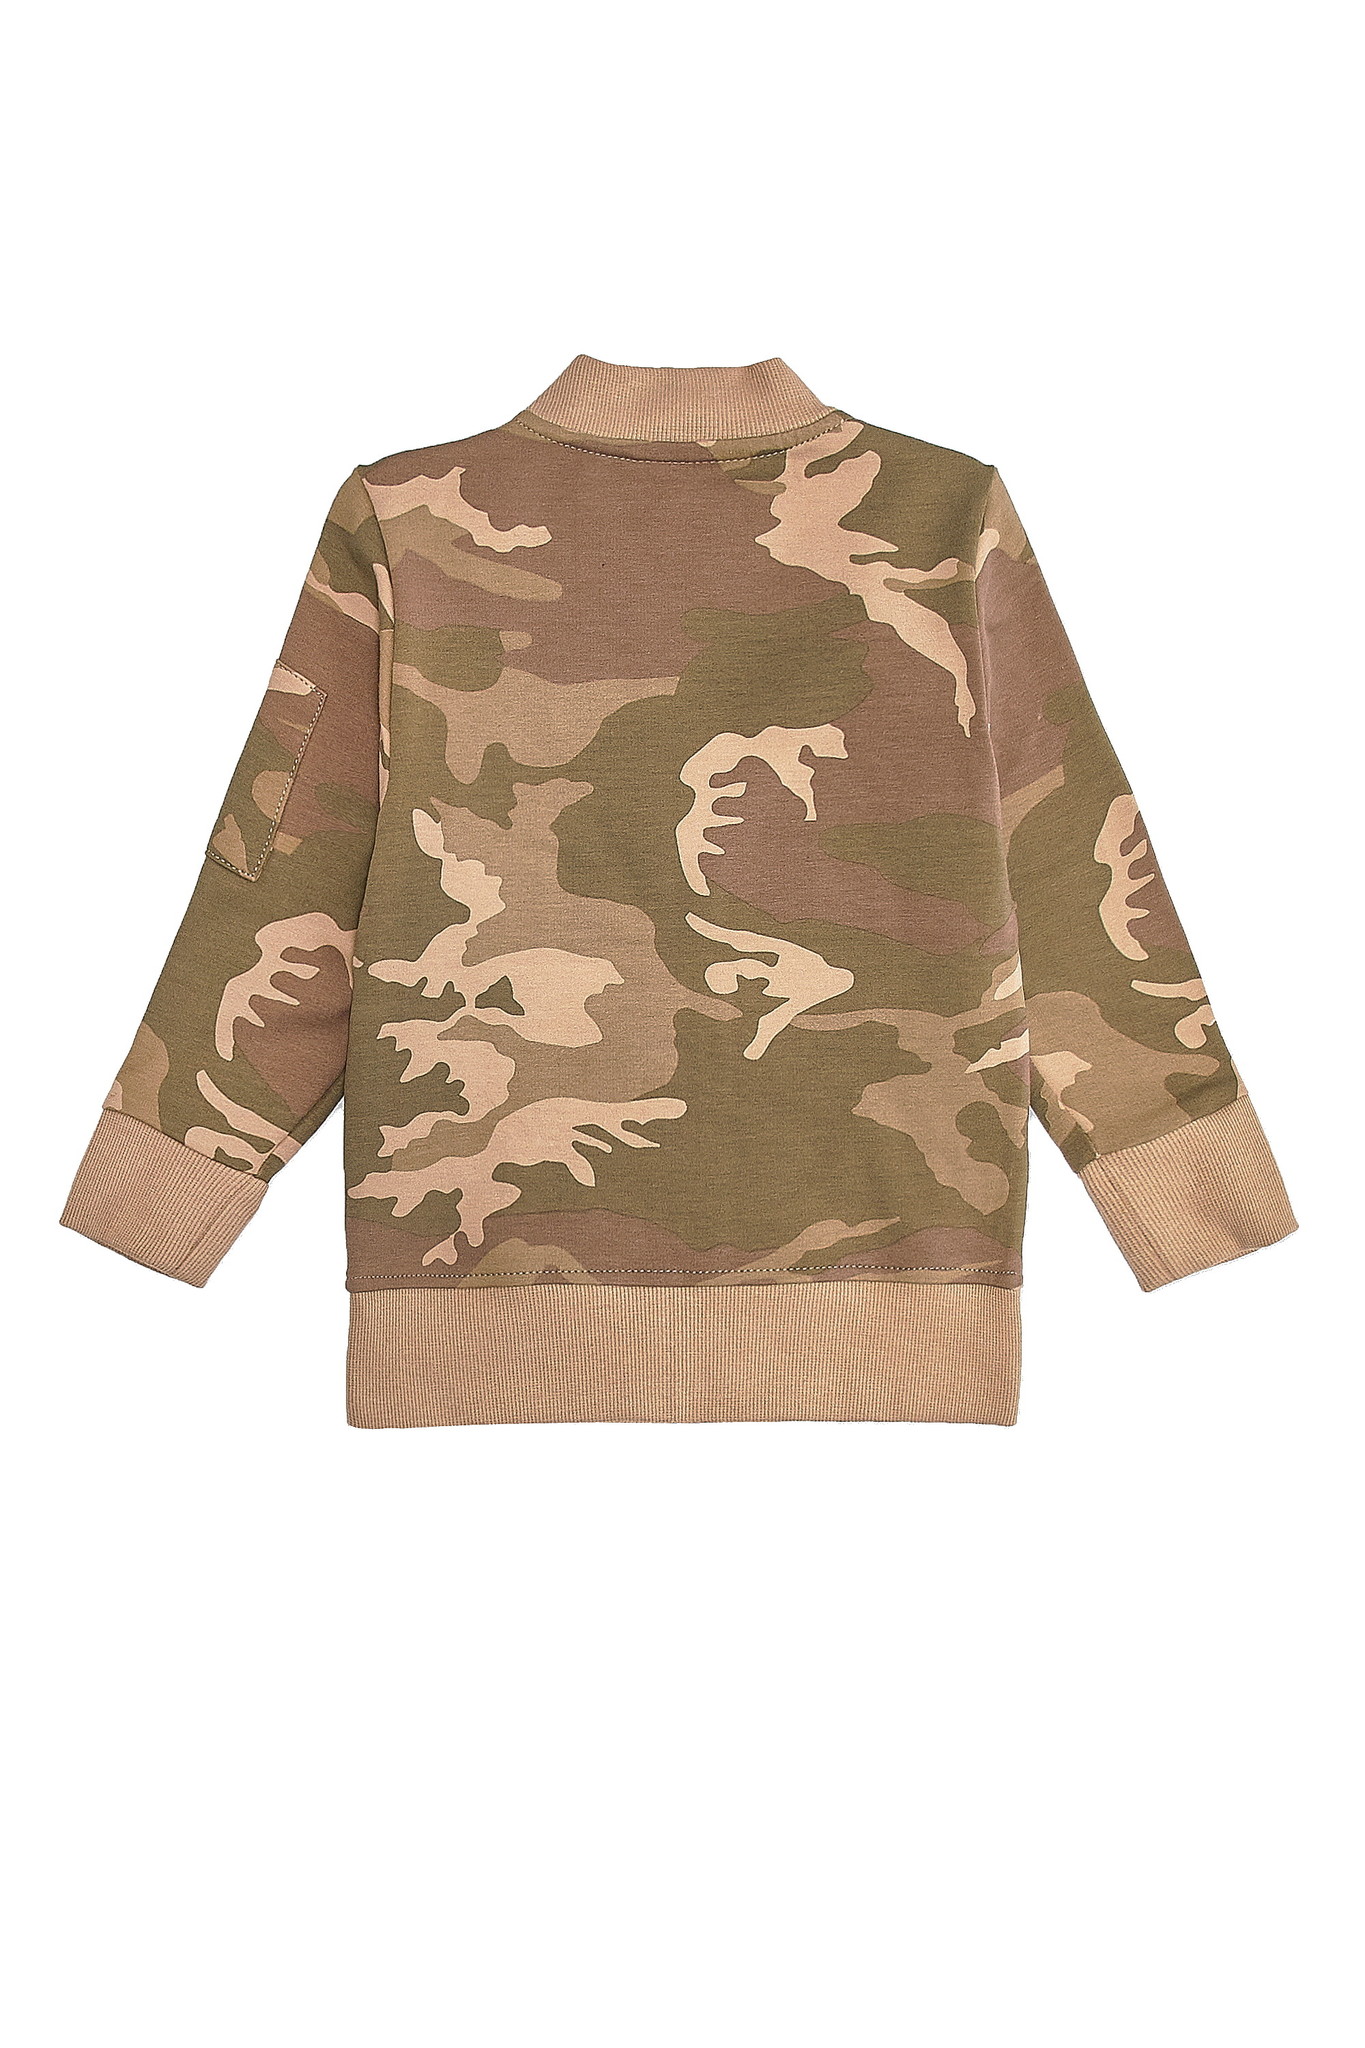 Minikid COOL BOMBER JACKET FOR CHILDREN | LONG BOMBER WITH CAMO PRINT | MINIKID